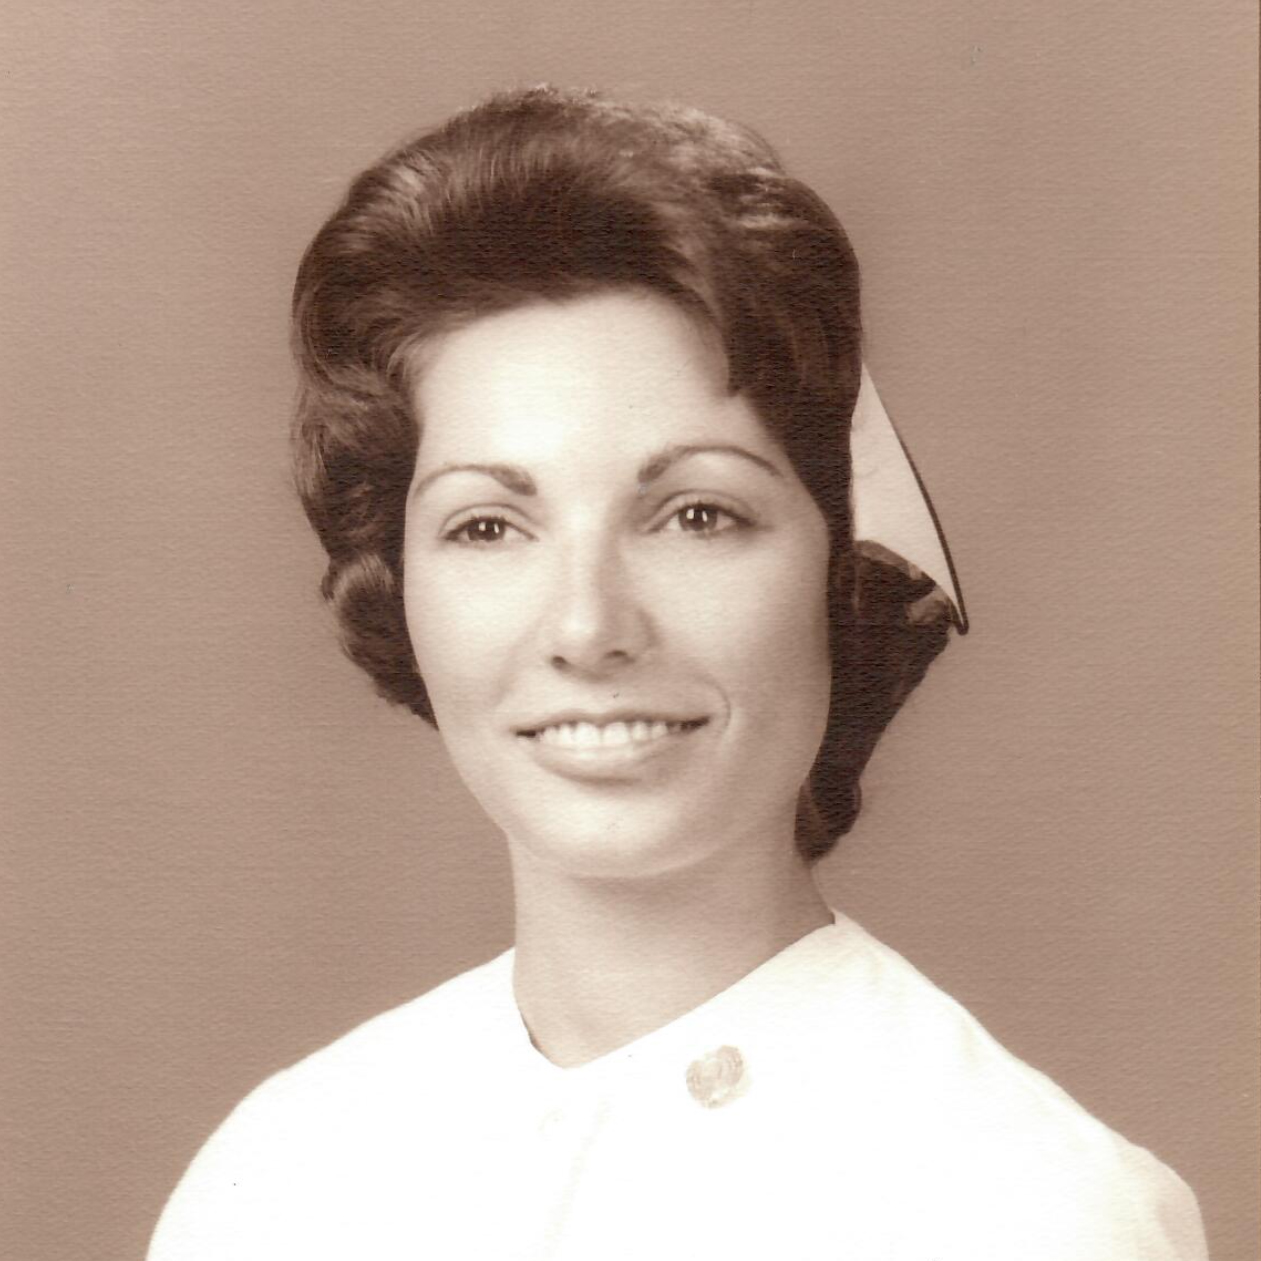 Sandy in her new white uniform for graduation, 1965